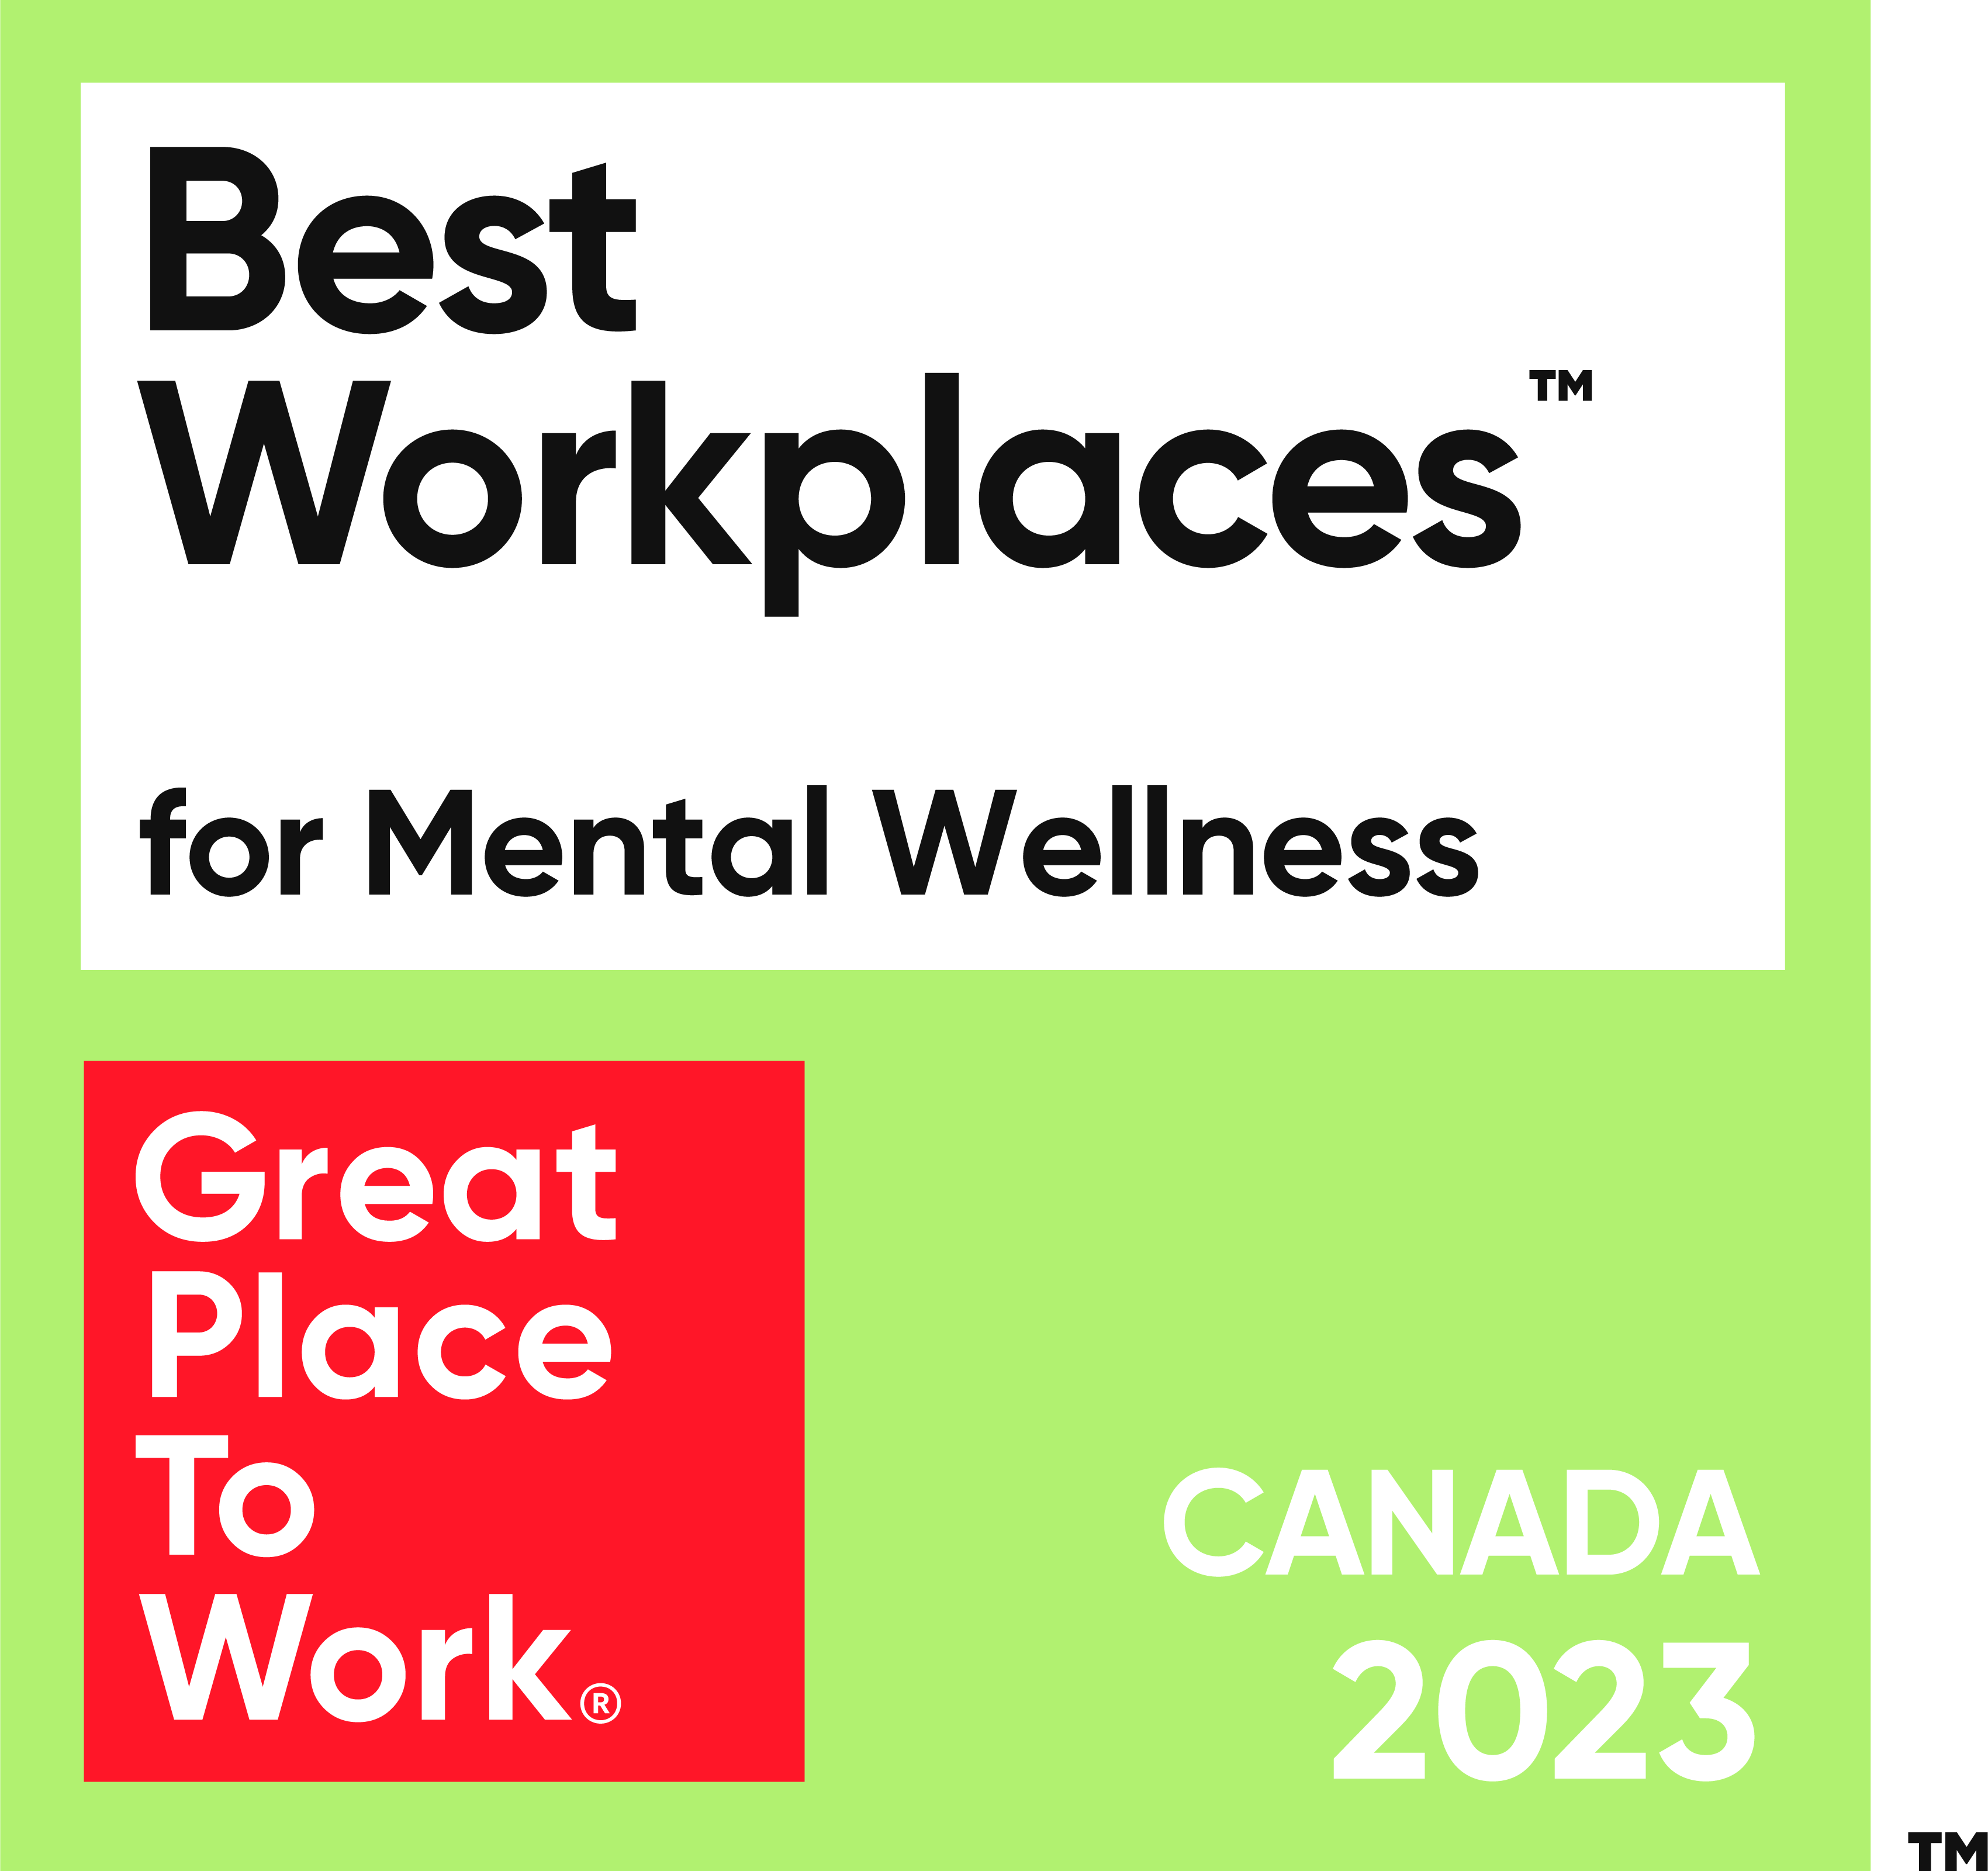 Best workplaces for mental wellness